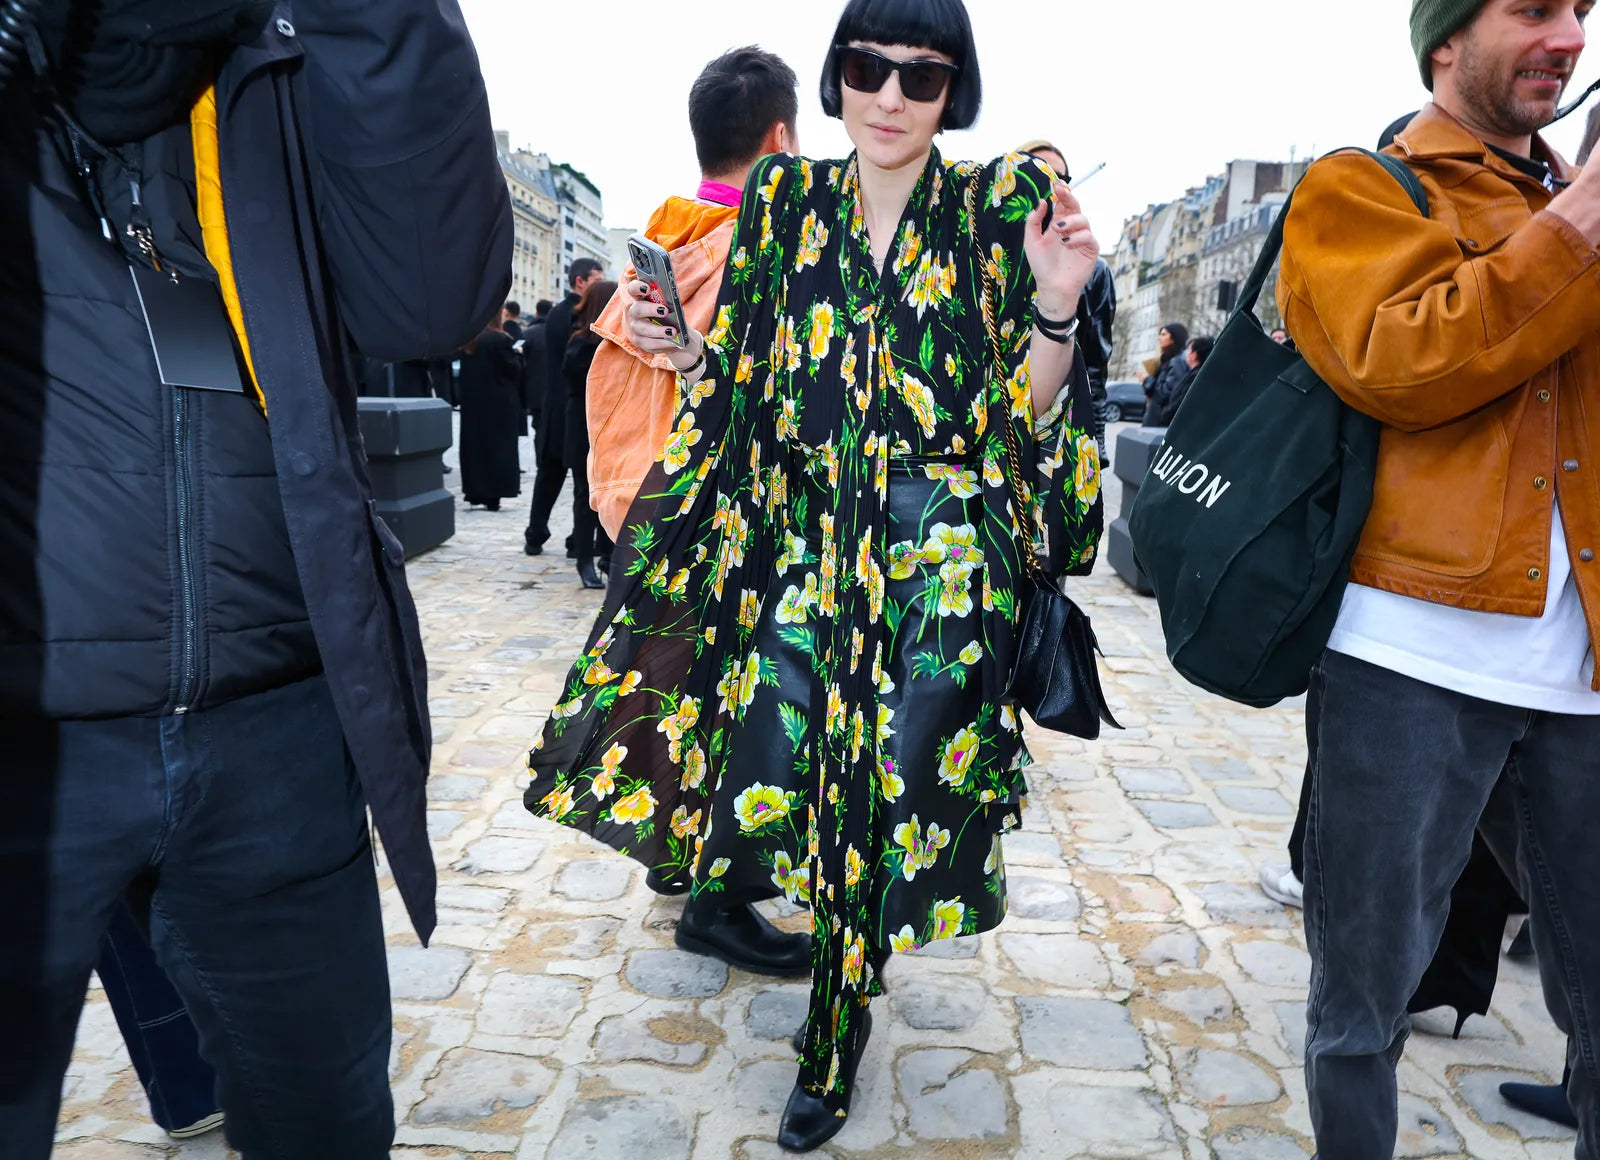 woman with sunglasses wearing a black dress with green and yellow flowers